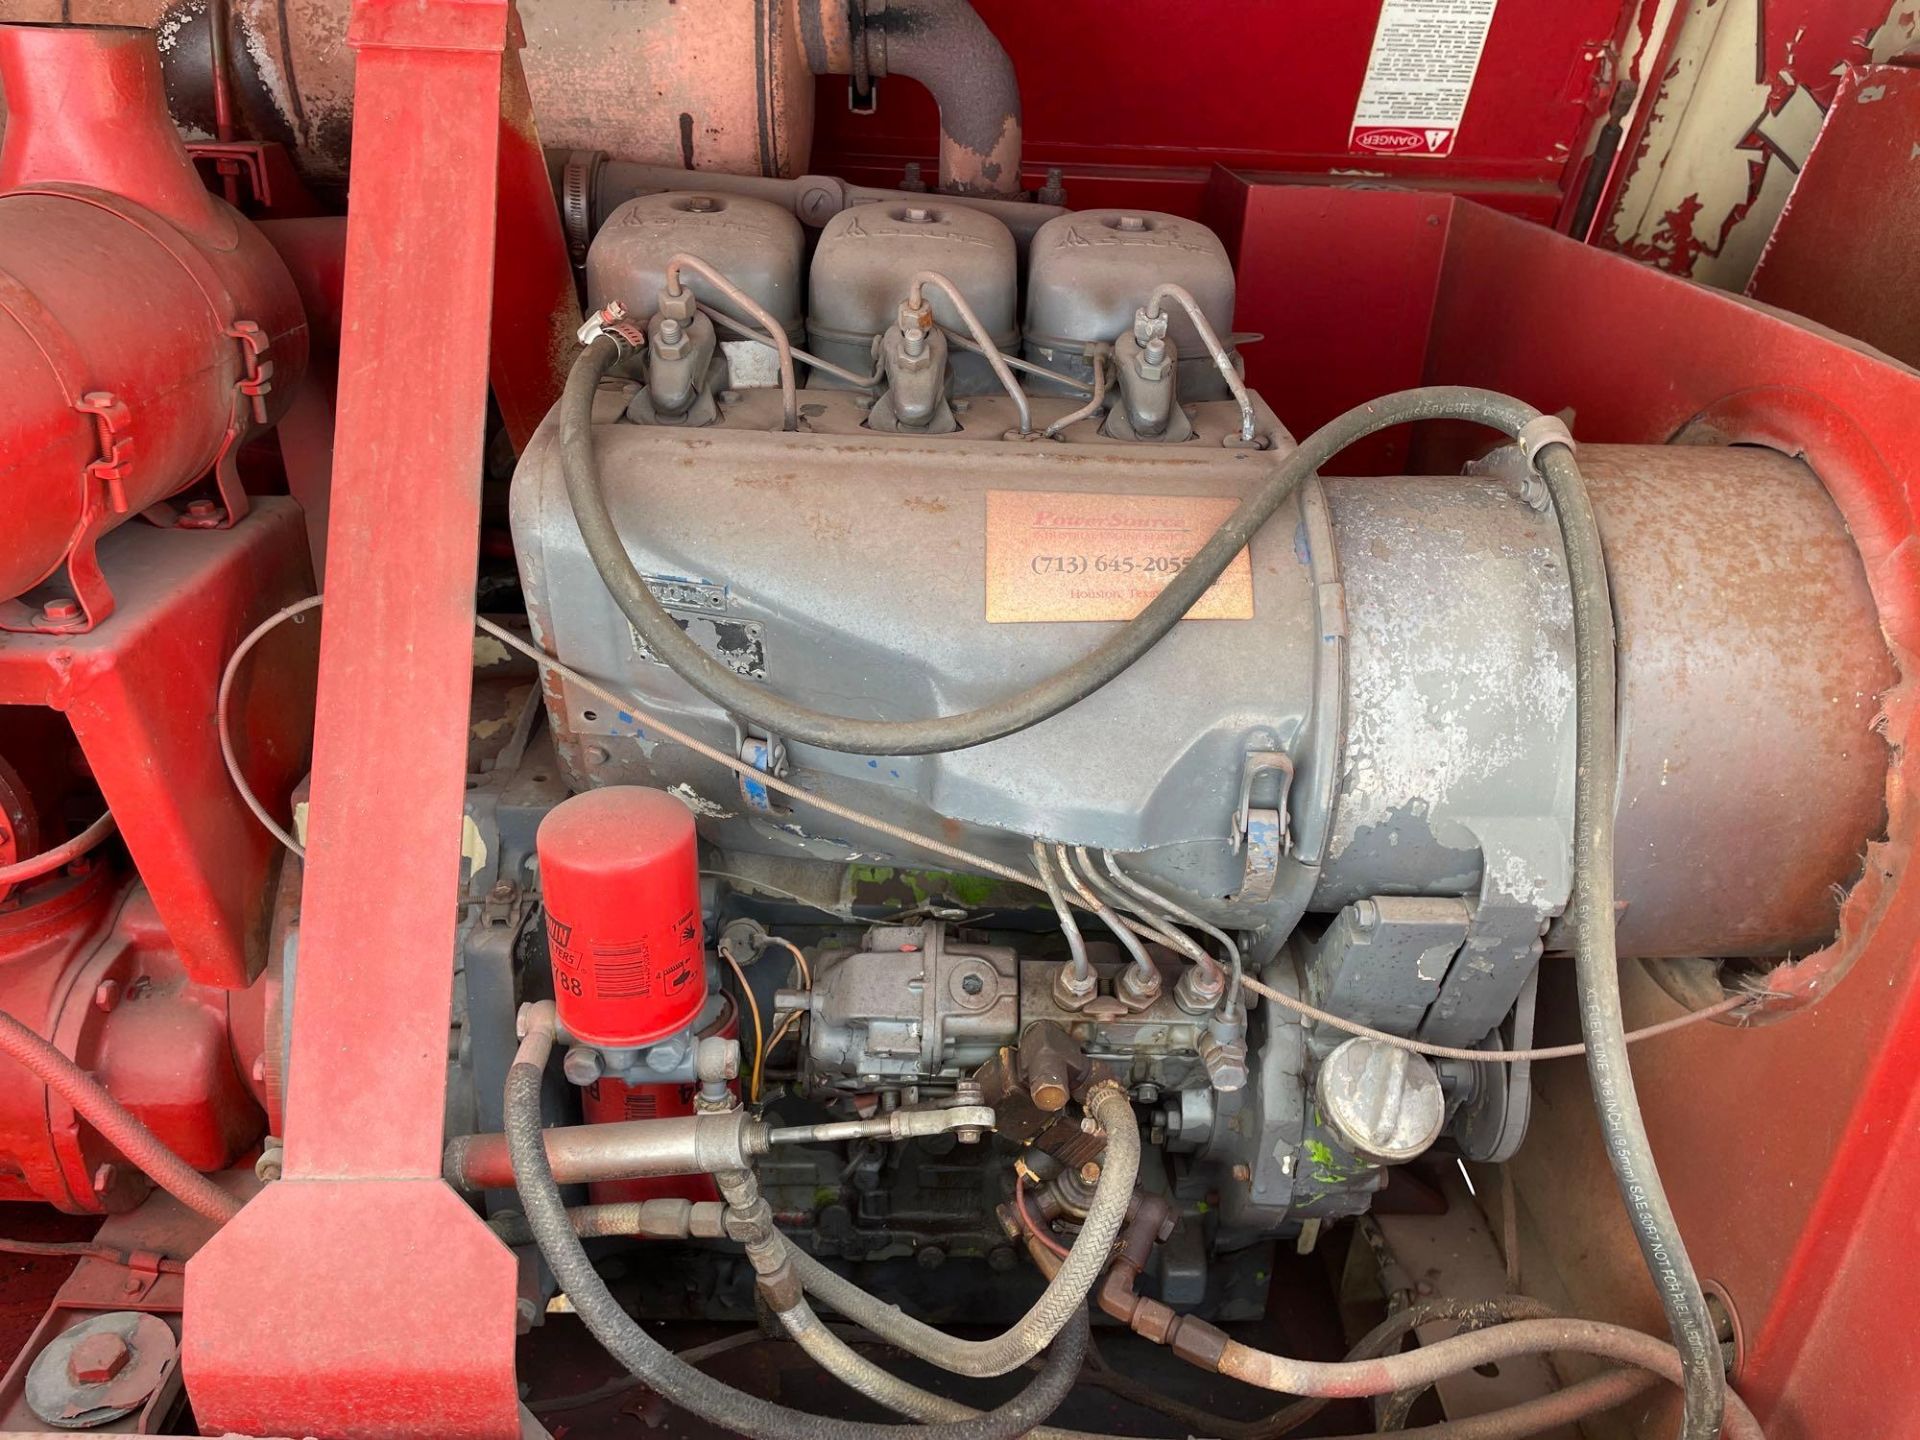 Ingersoll Rand Portable Air Compressor with Diesel Engine - Image 13 of 17